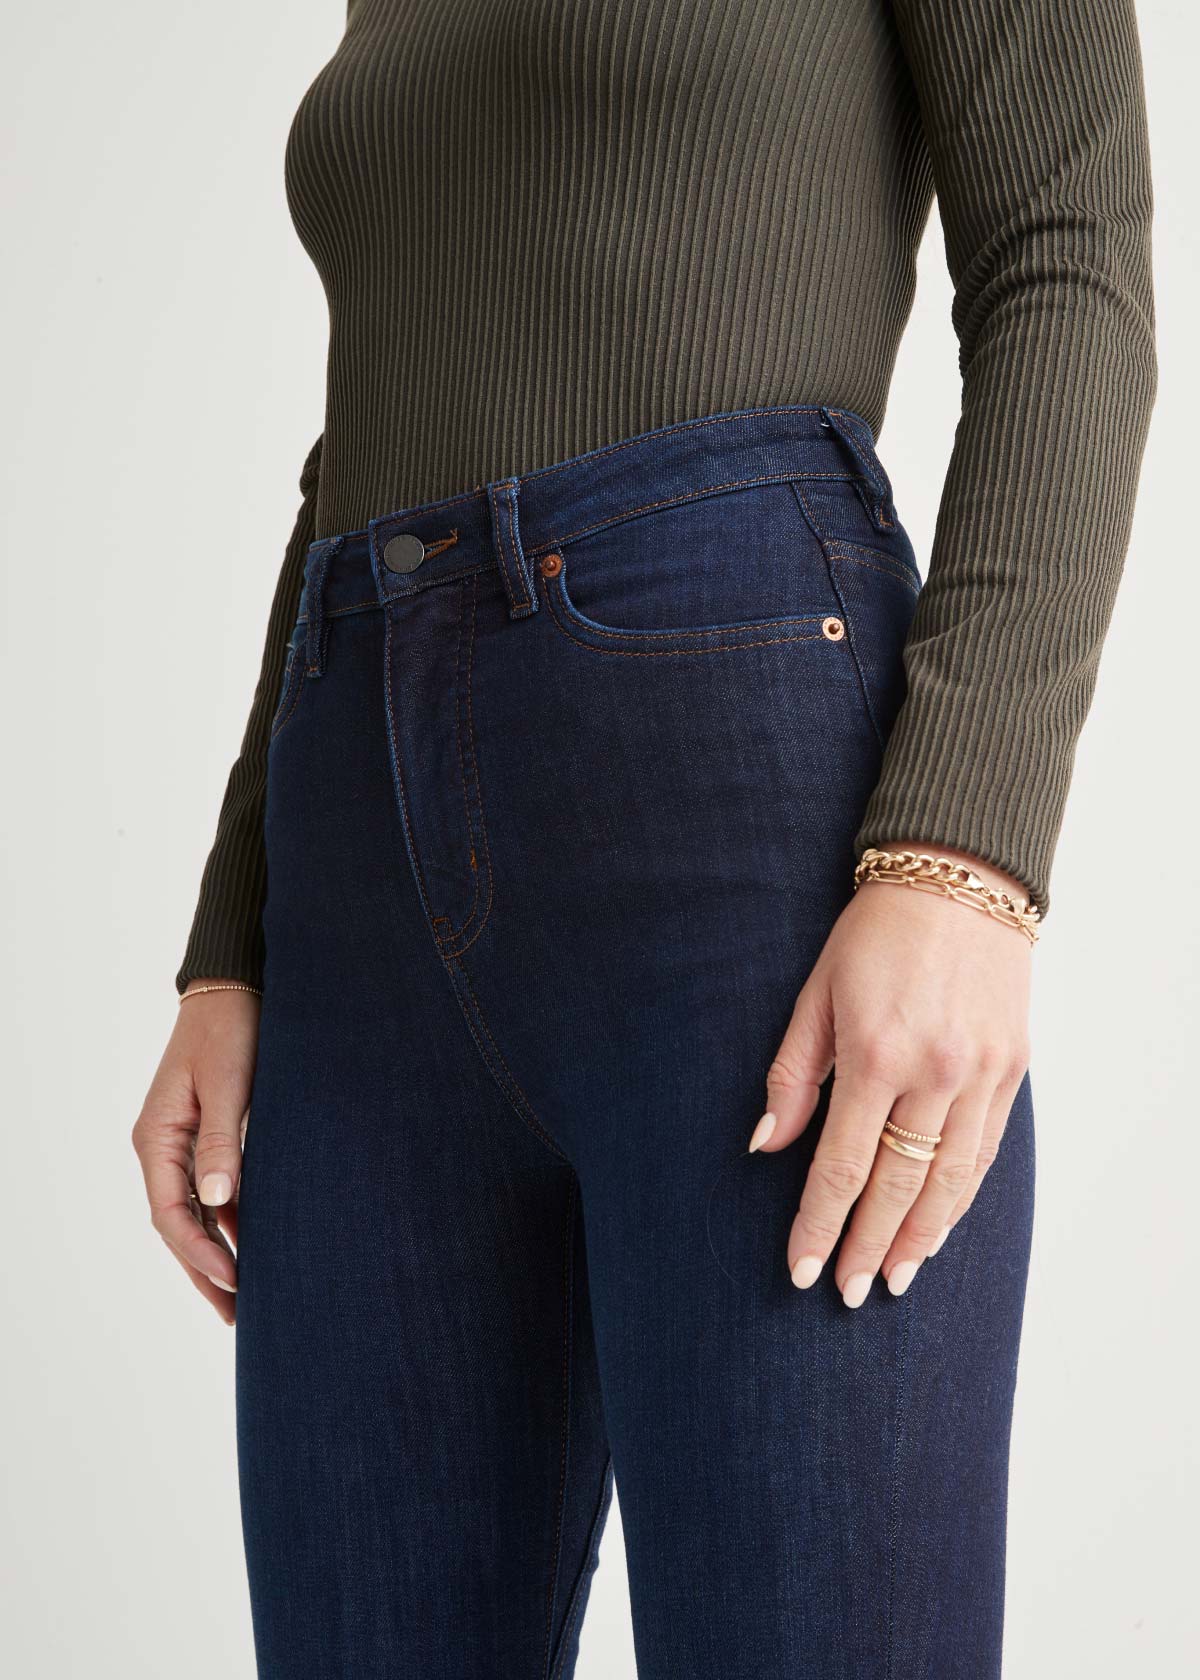 The Best Dark Wash Jeans For Women All Shapes & Sizes